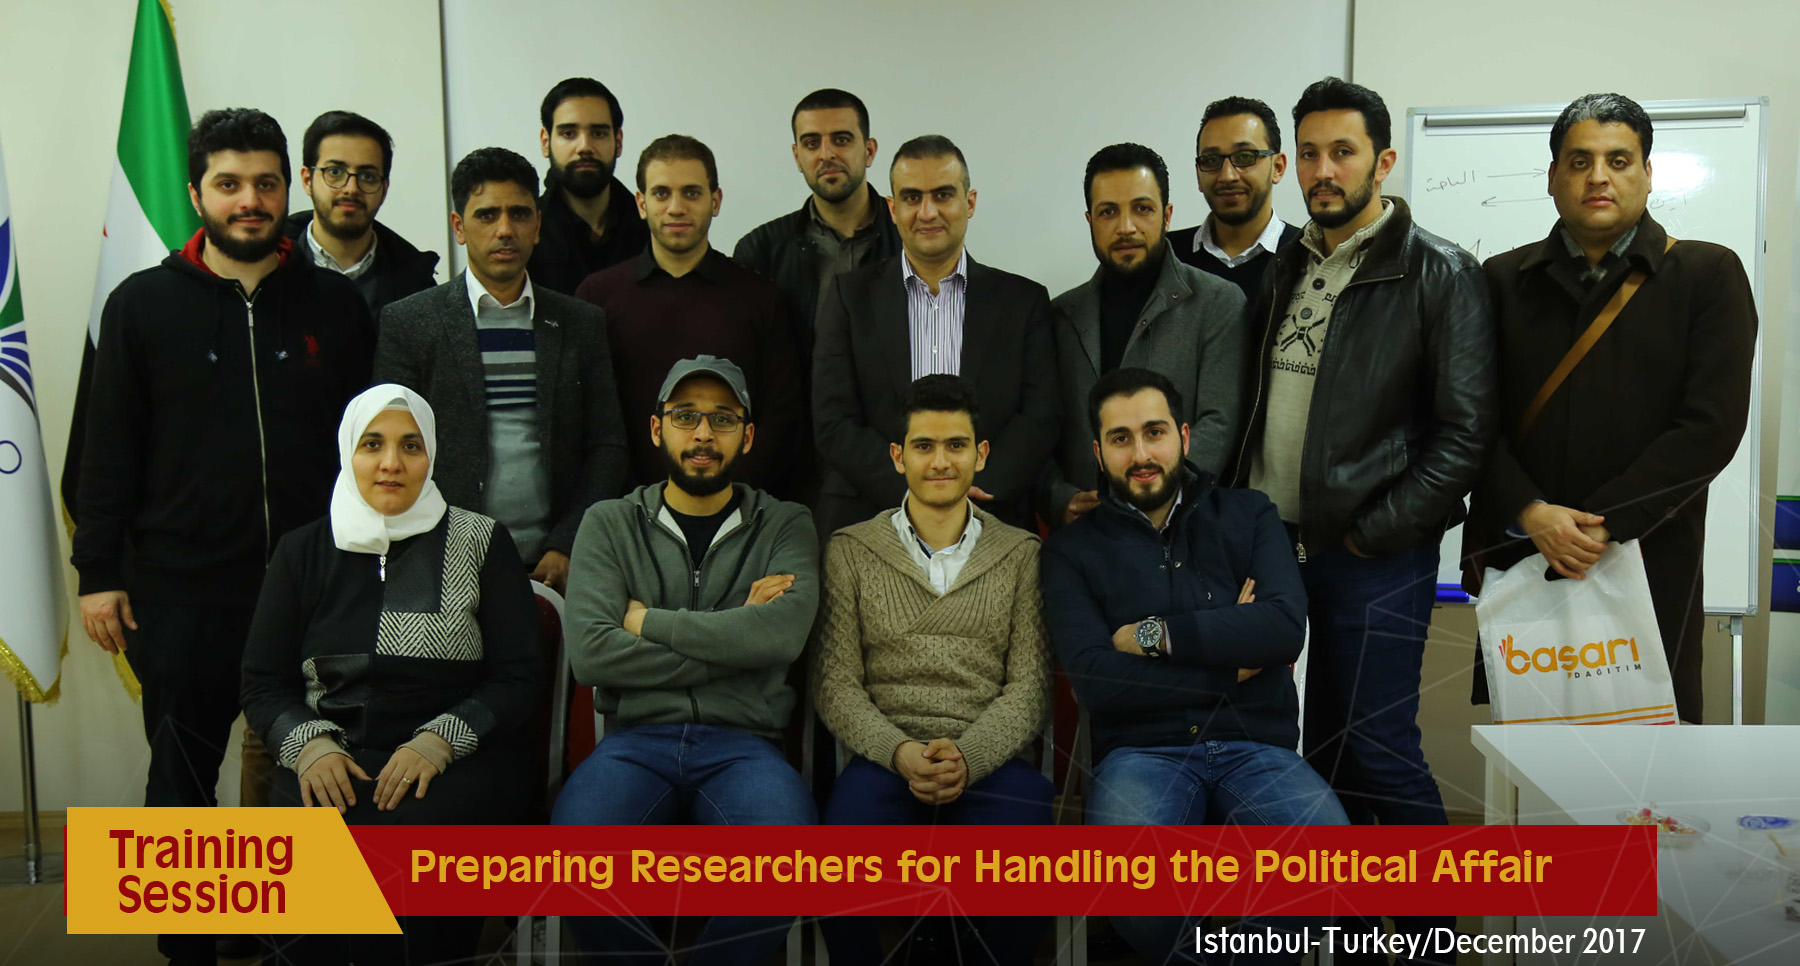 Training Session for Preparing Researchers